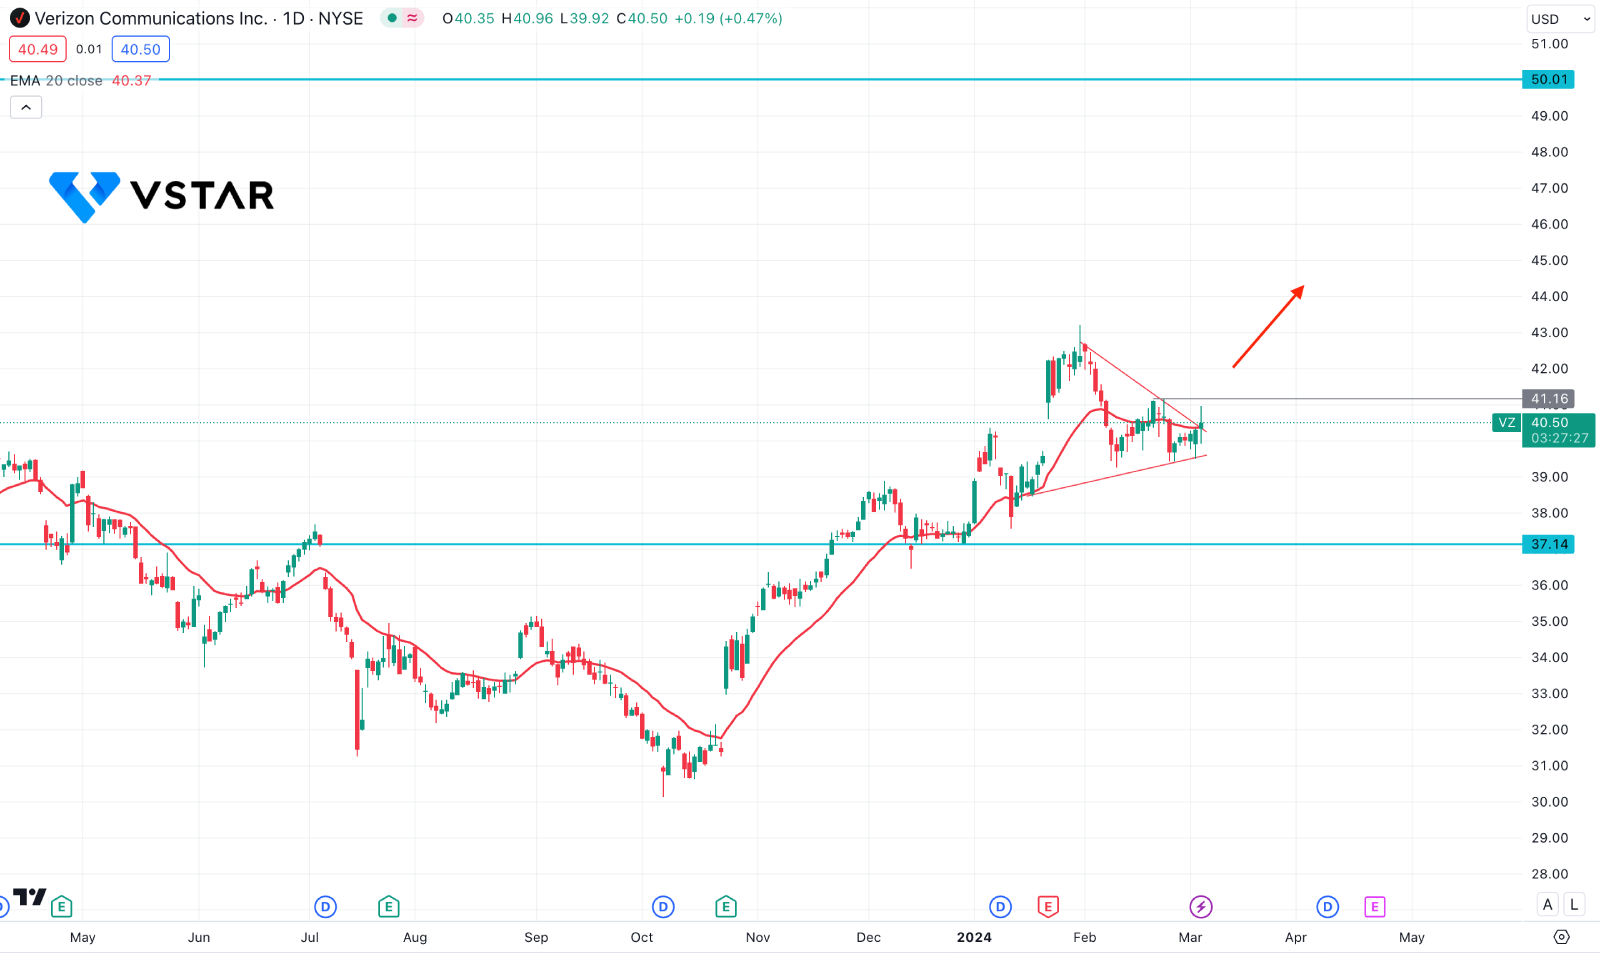 Verizon Communications Inc. (VZ) Is Potential To Reach The $50.00 Level